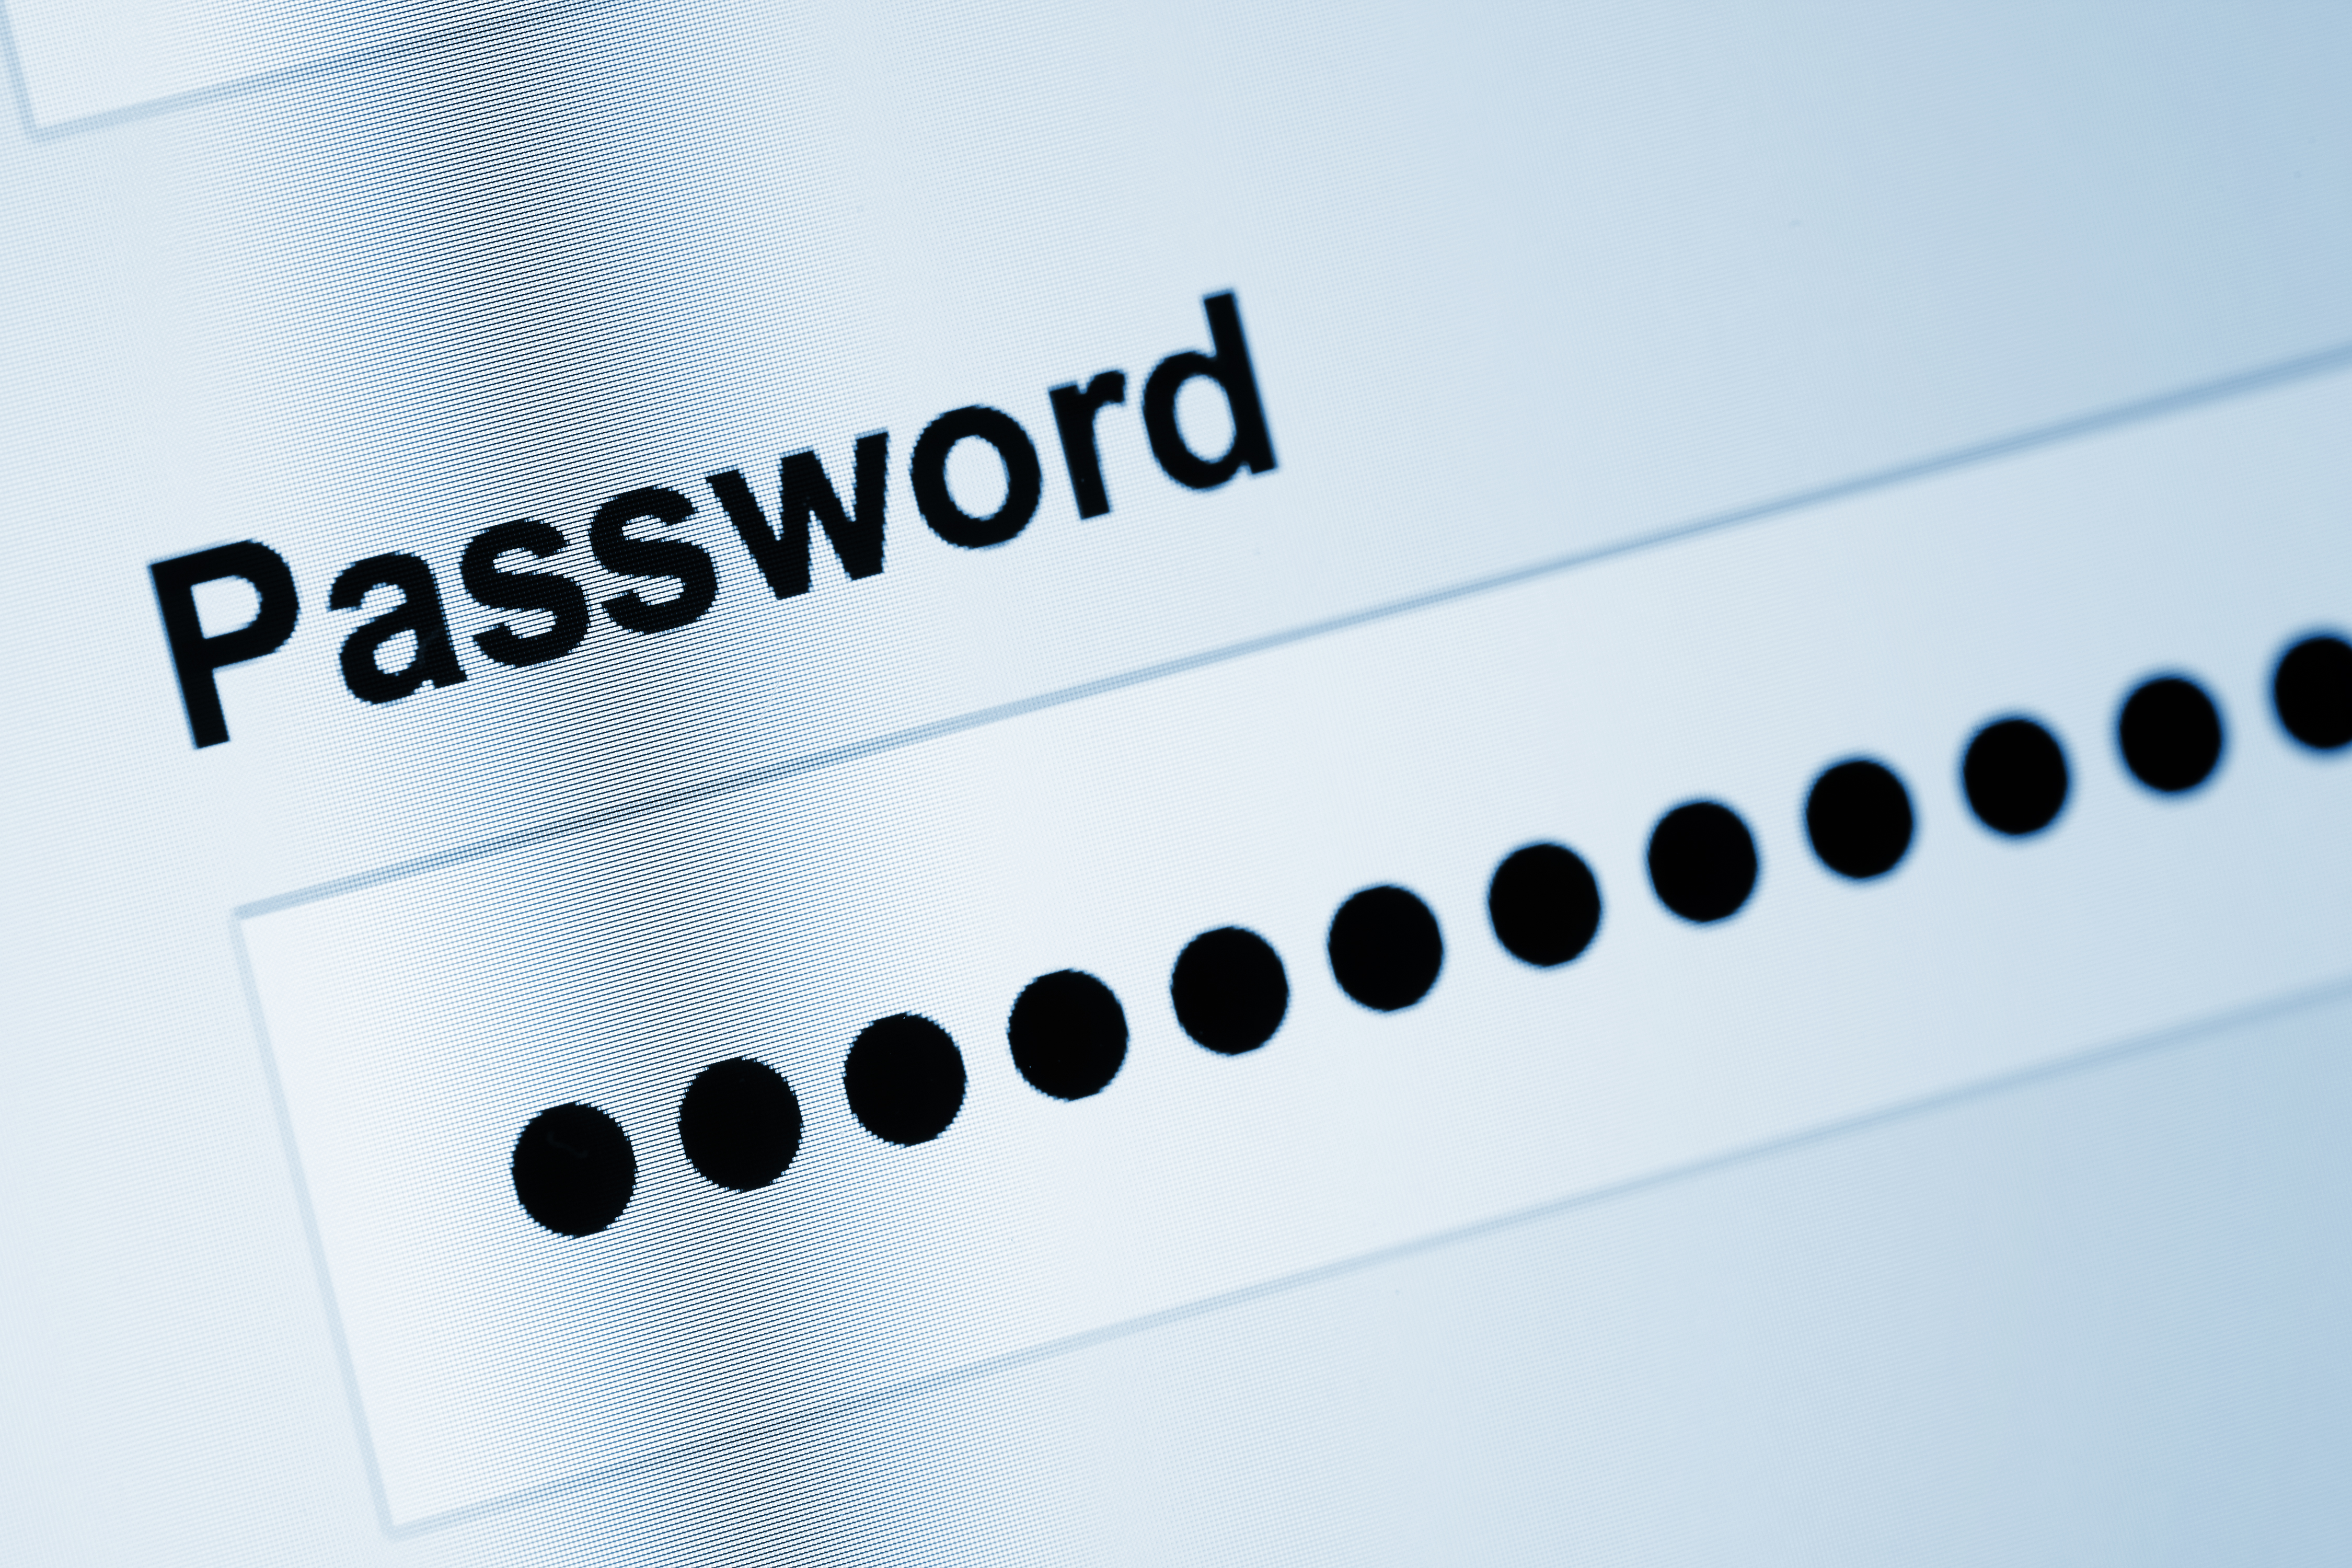 Keep E-Commerce clients safe by requiring strong passwords